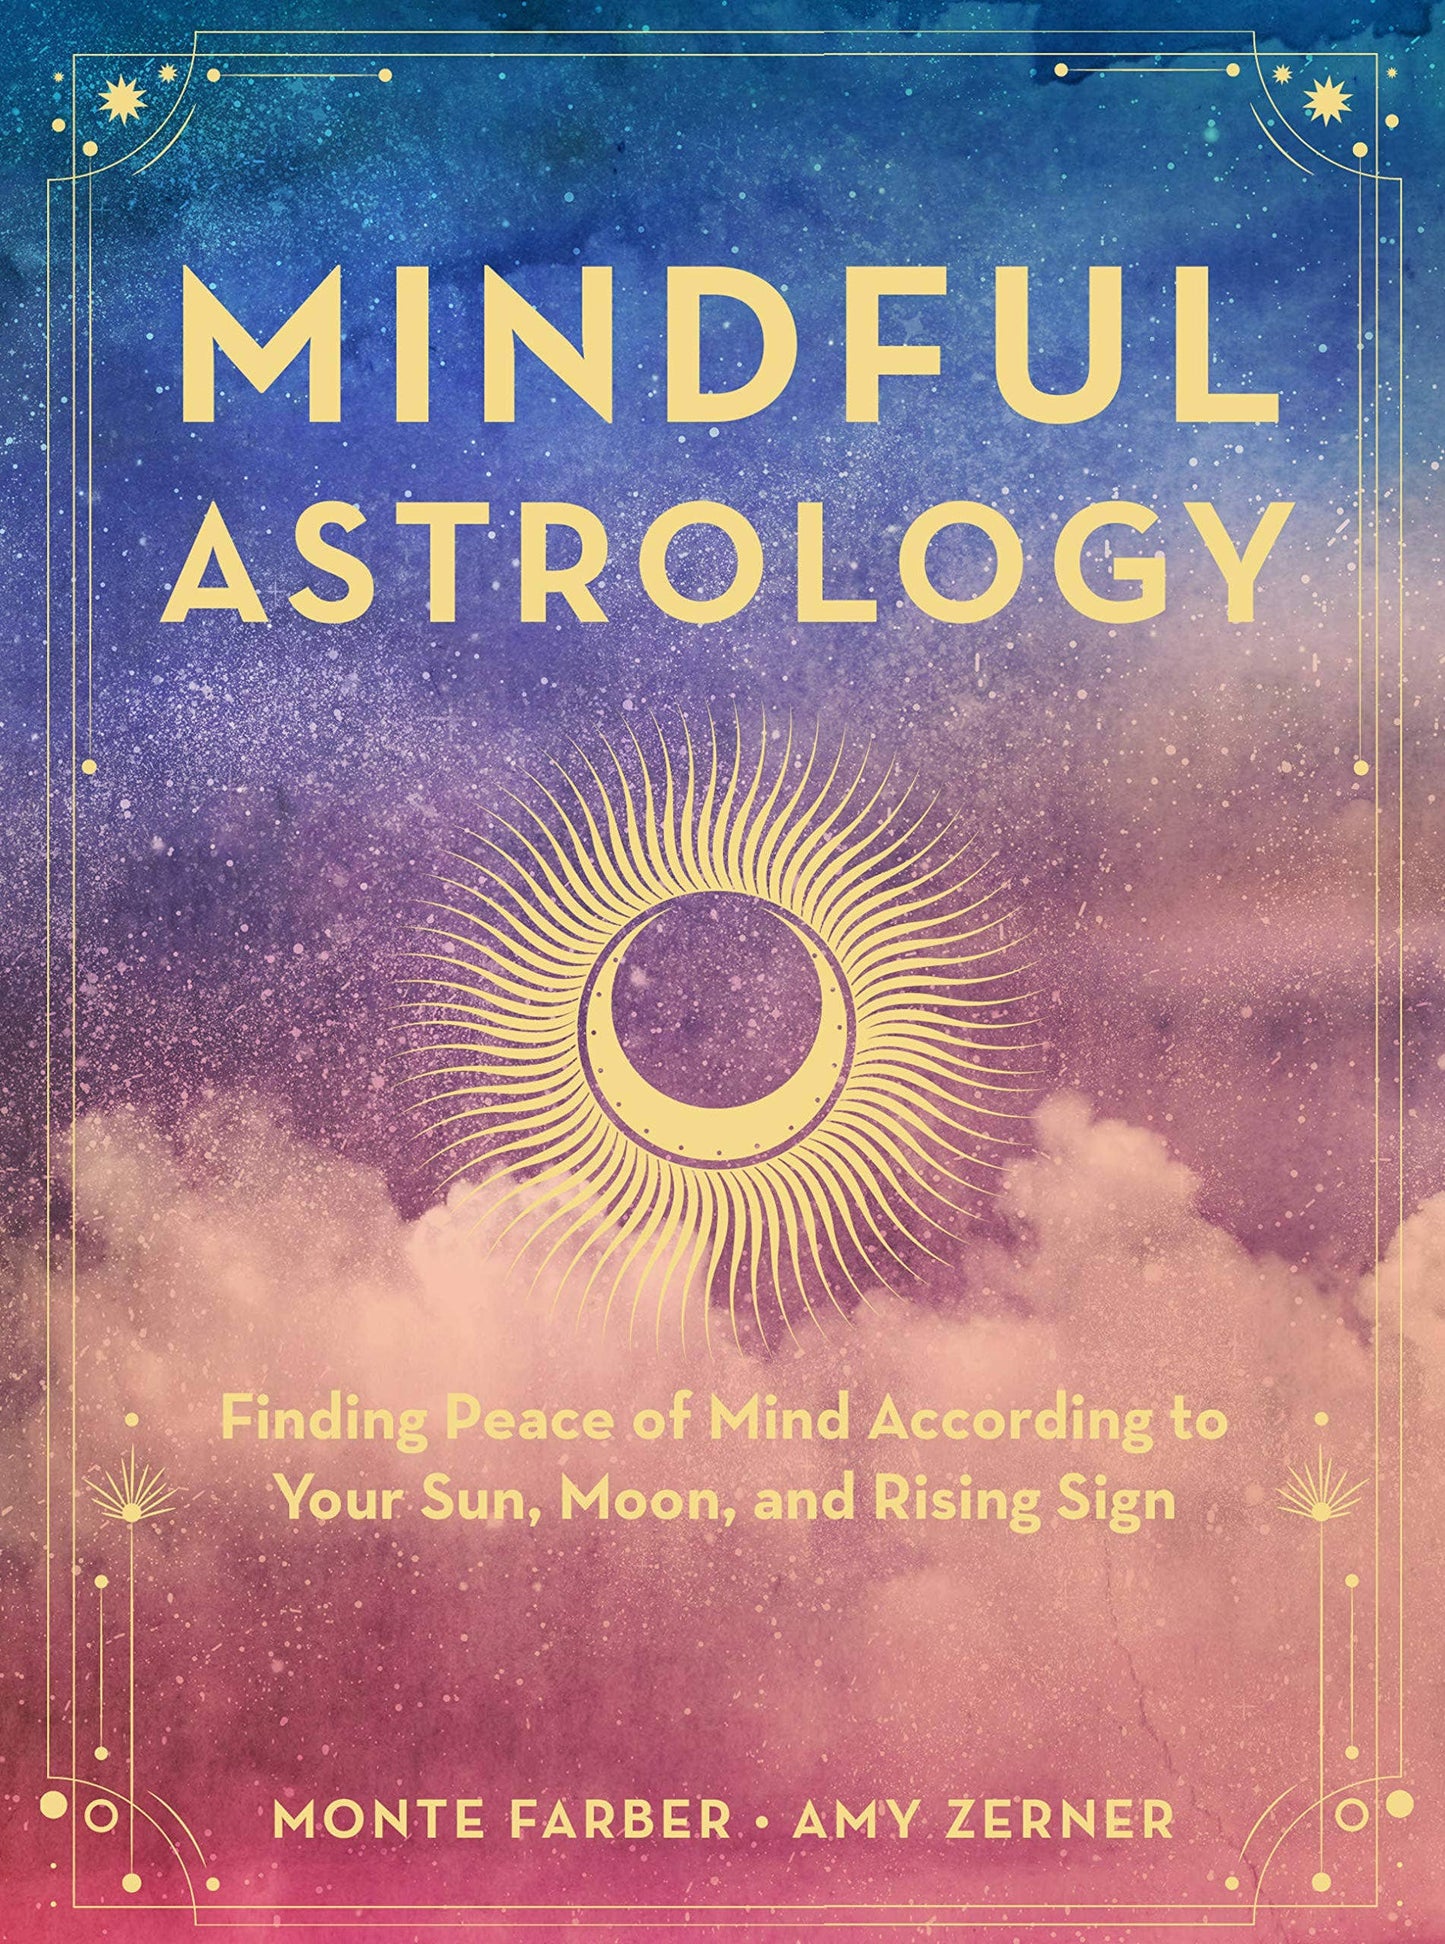 Mindful Astrology: Finding Peace of Mind According to Signs